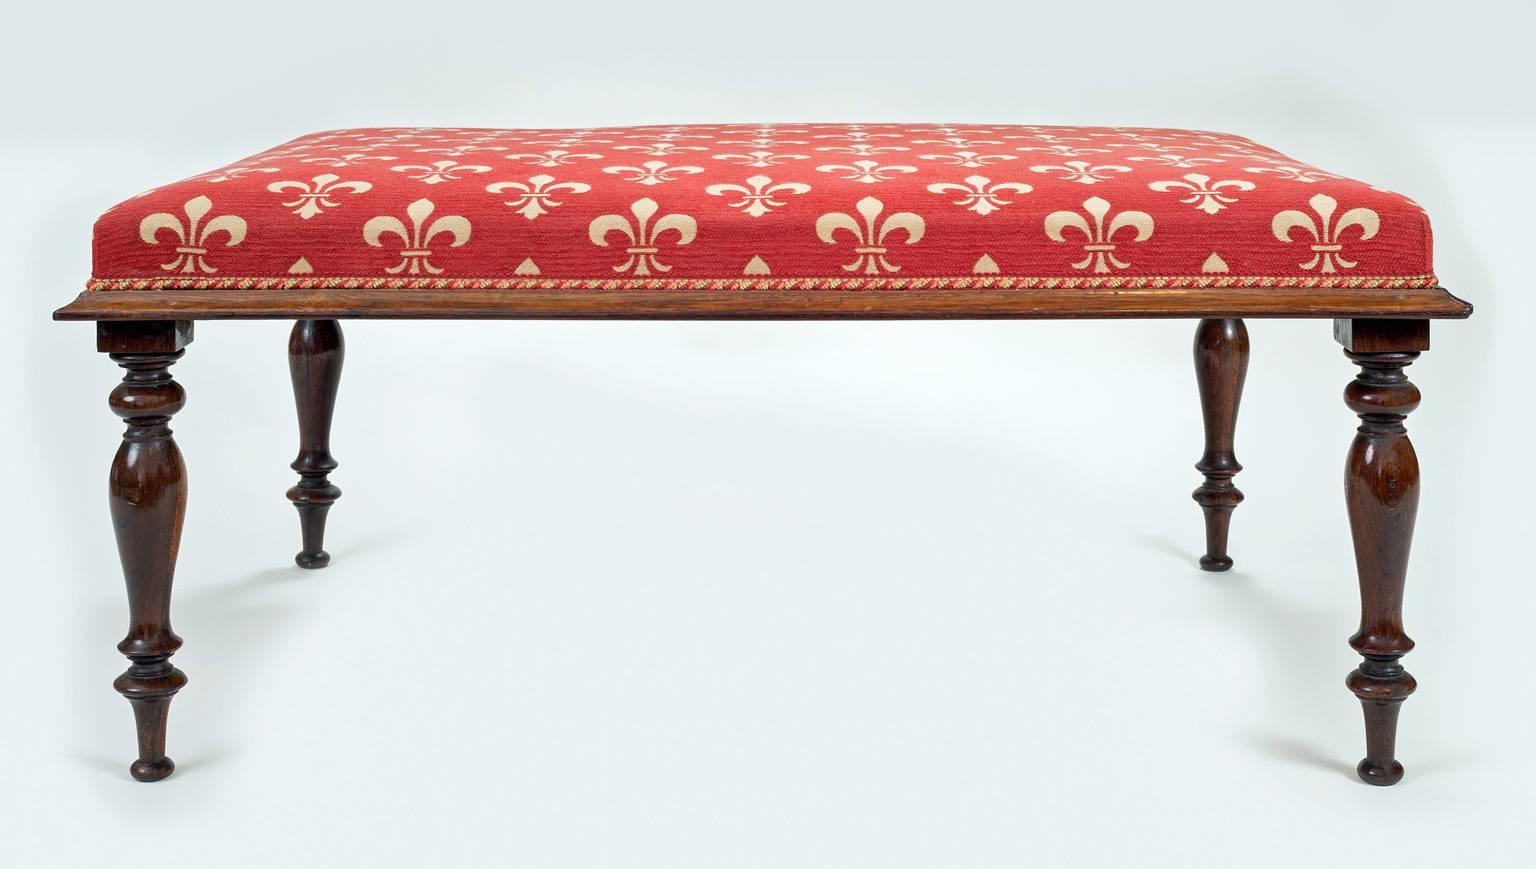 Regency bench with rosewood frame on turned legs. Upholstered in Brunschwig and Fils fabric decorated with fleur-de-lis on red background.